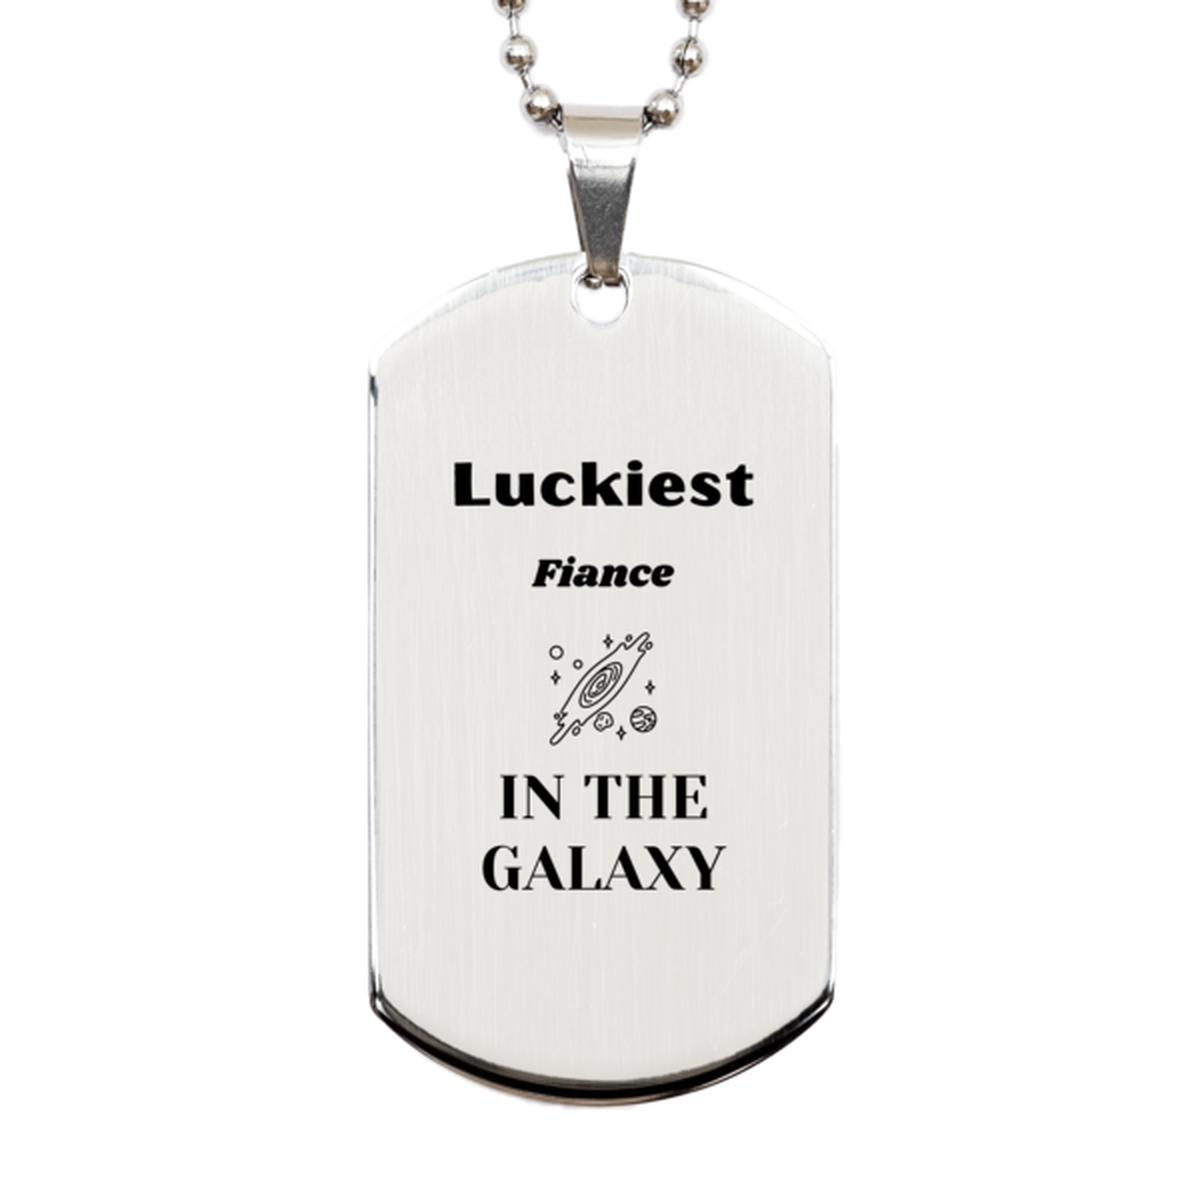 Luckiest Fiance in the Galaxy, To My Fiance Engraved Gifts, Christmas Fiance Silver Dog Tag Gifts, X-mas Birthday Unique Gifts For Fiance Men Women